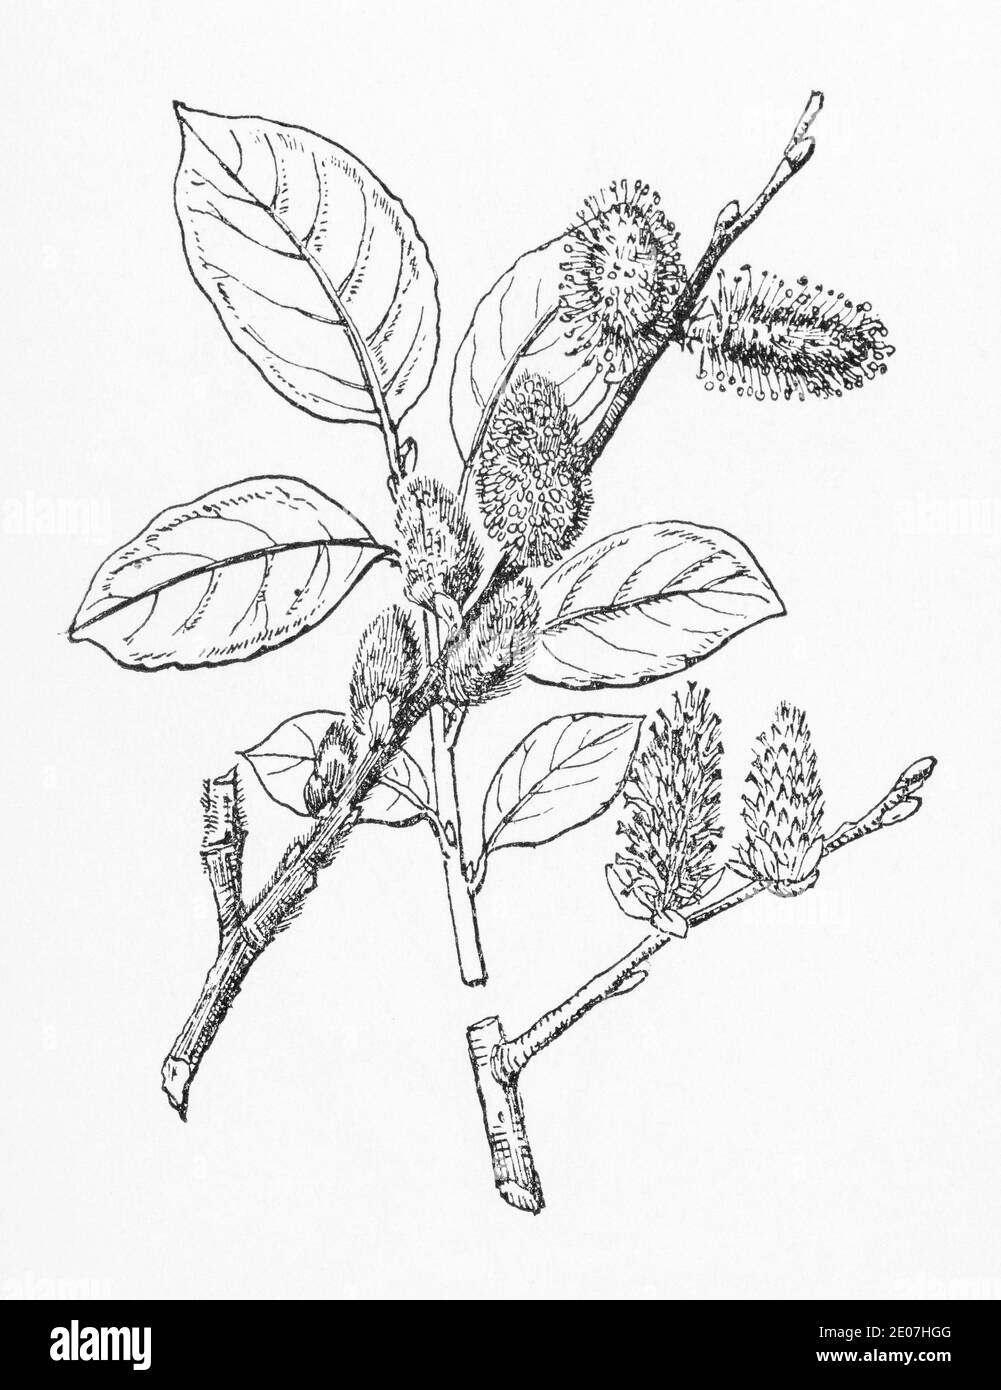 Old botanical illustration engraving of Goat Willow / Salix caprea. Traditional medicinal herbal plant. See Notes Stock Photo